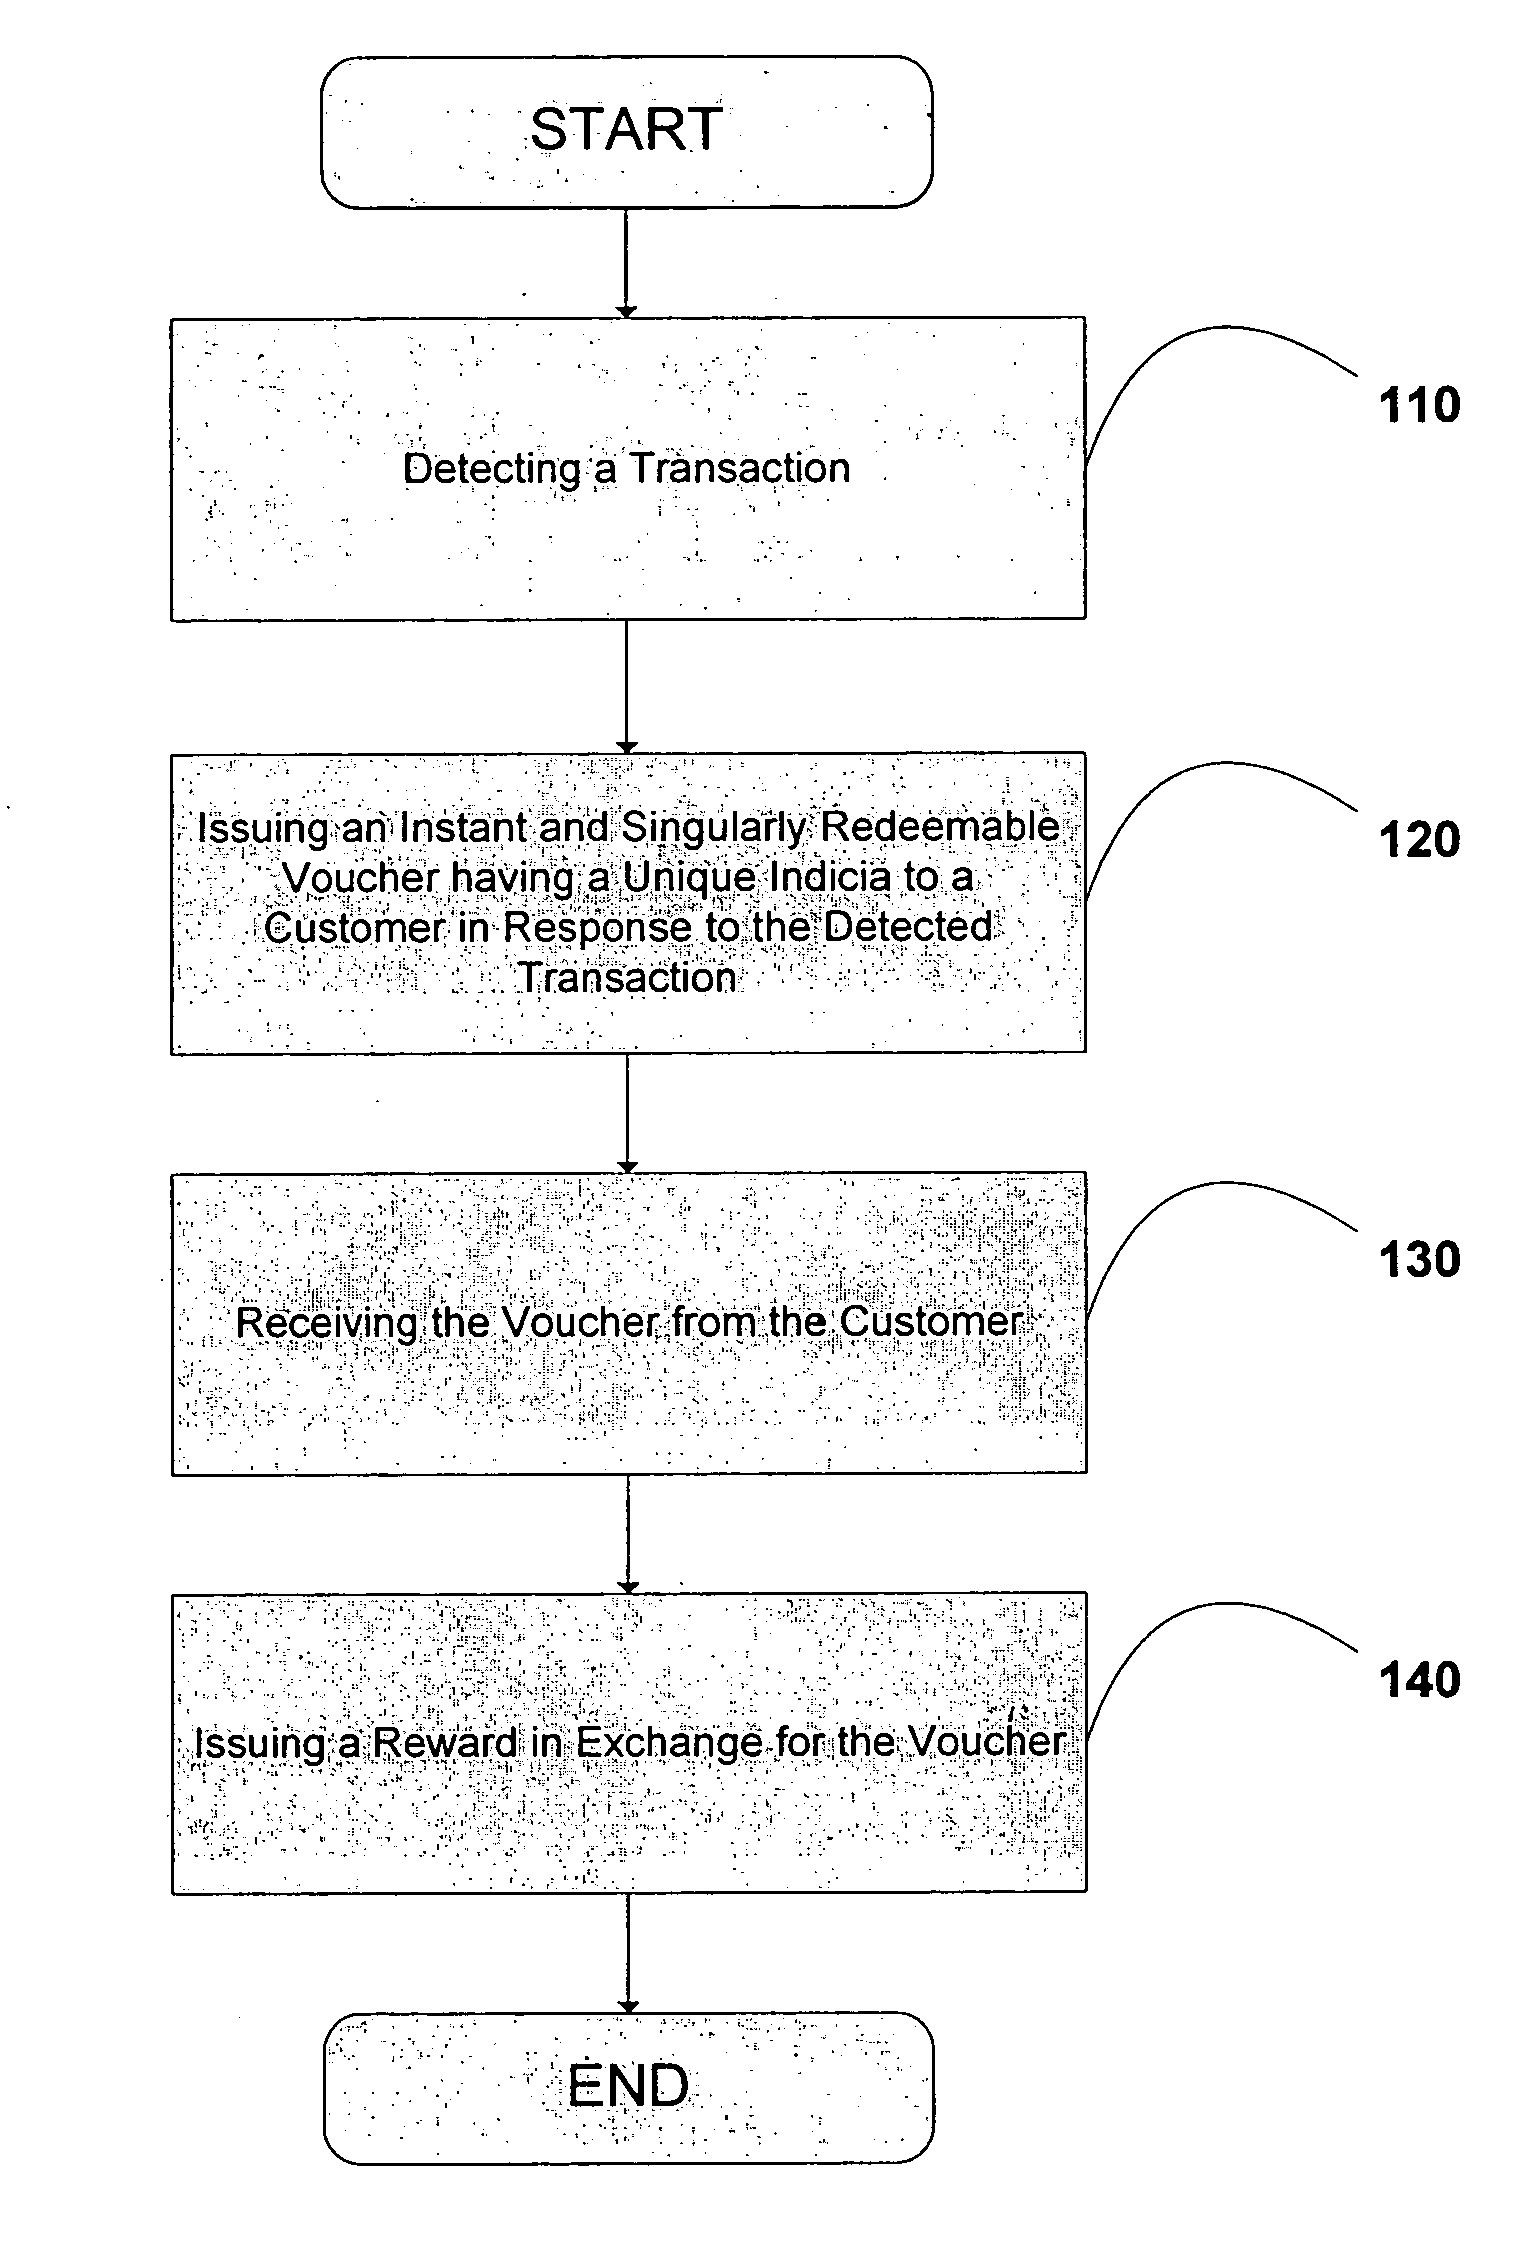 System and method for providing unique and immediately redeemable incentive vouchers to a customer to encourage transactions with a business entity